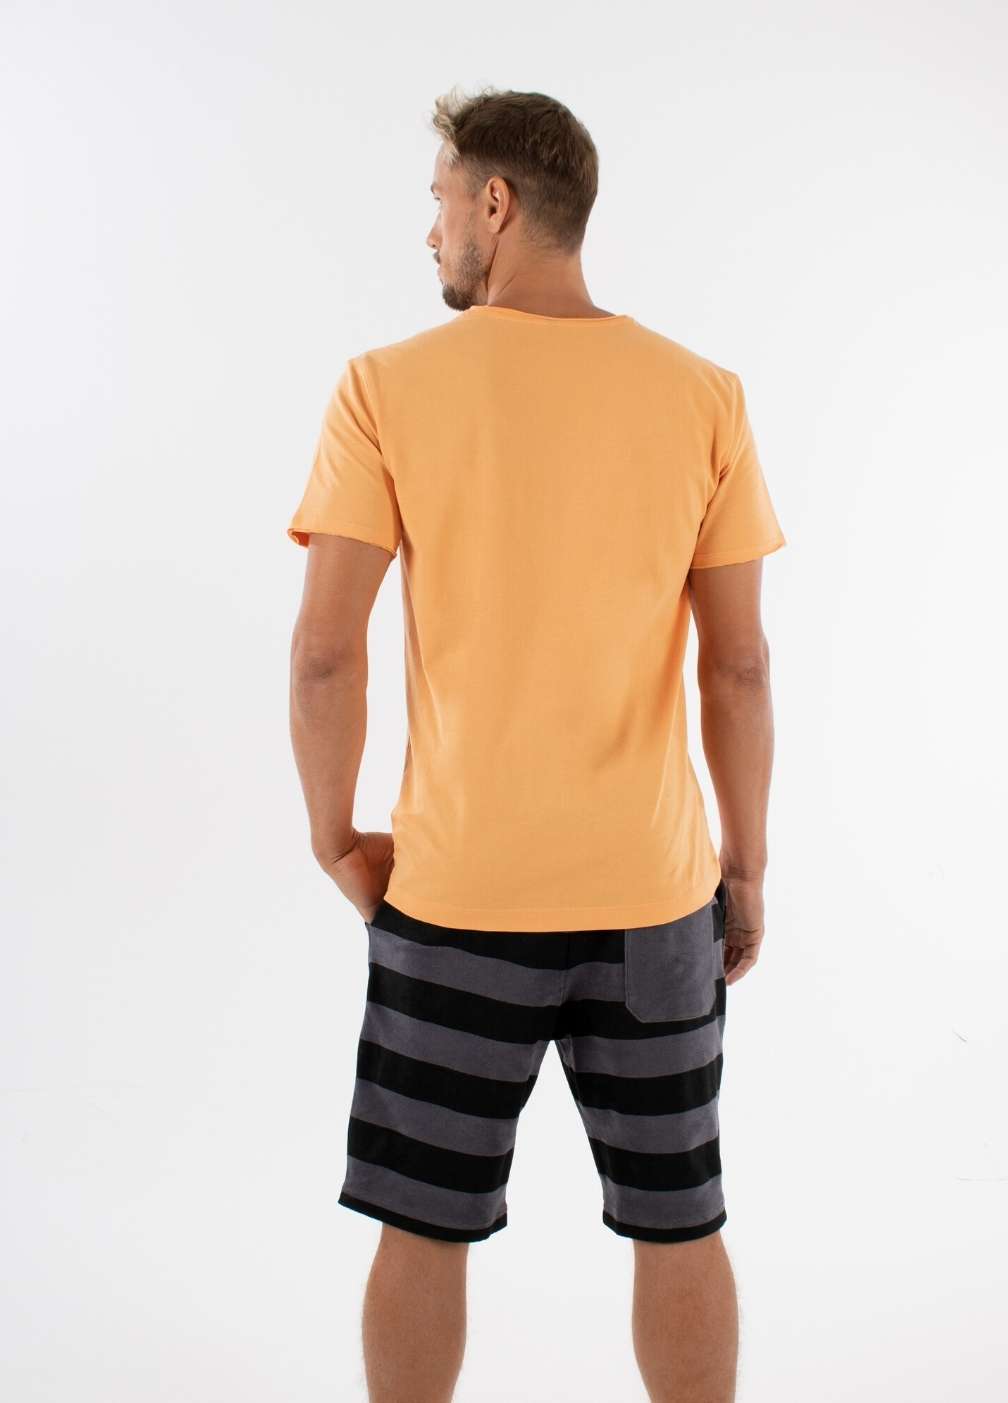 nuffinz GOLD EARTH T-SHIRT PURE - whole outfit visible from the back - sustainable men's t shirts - orange